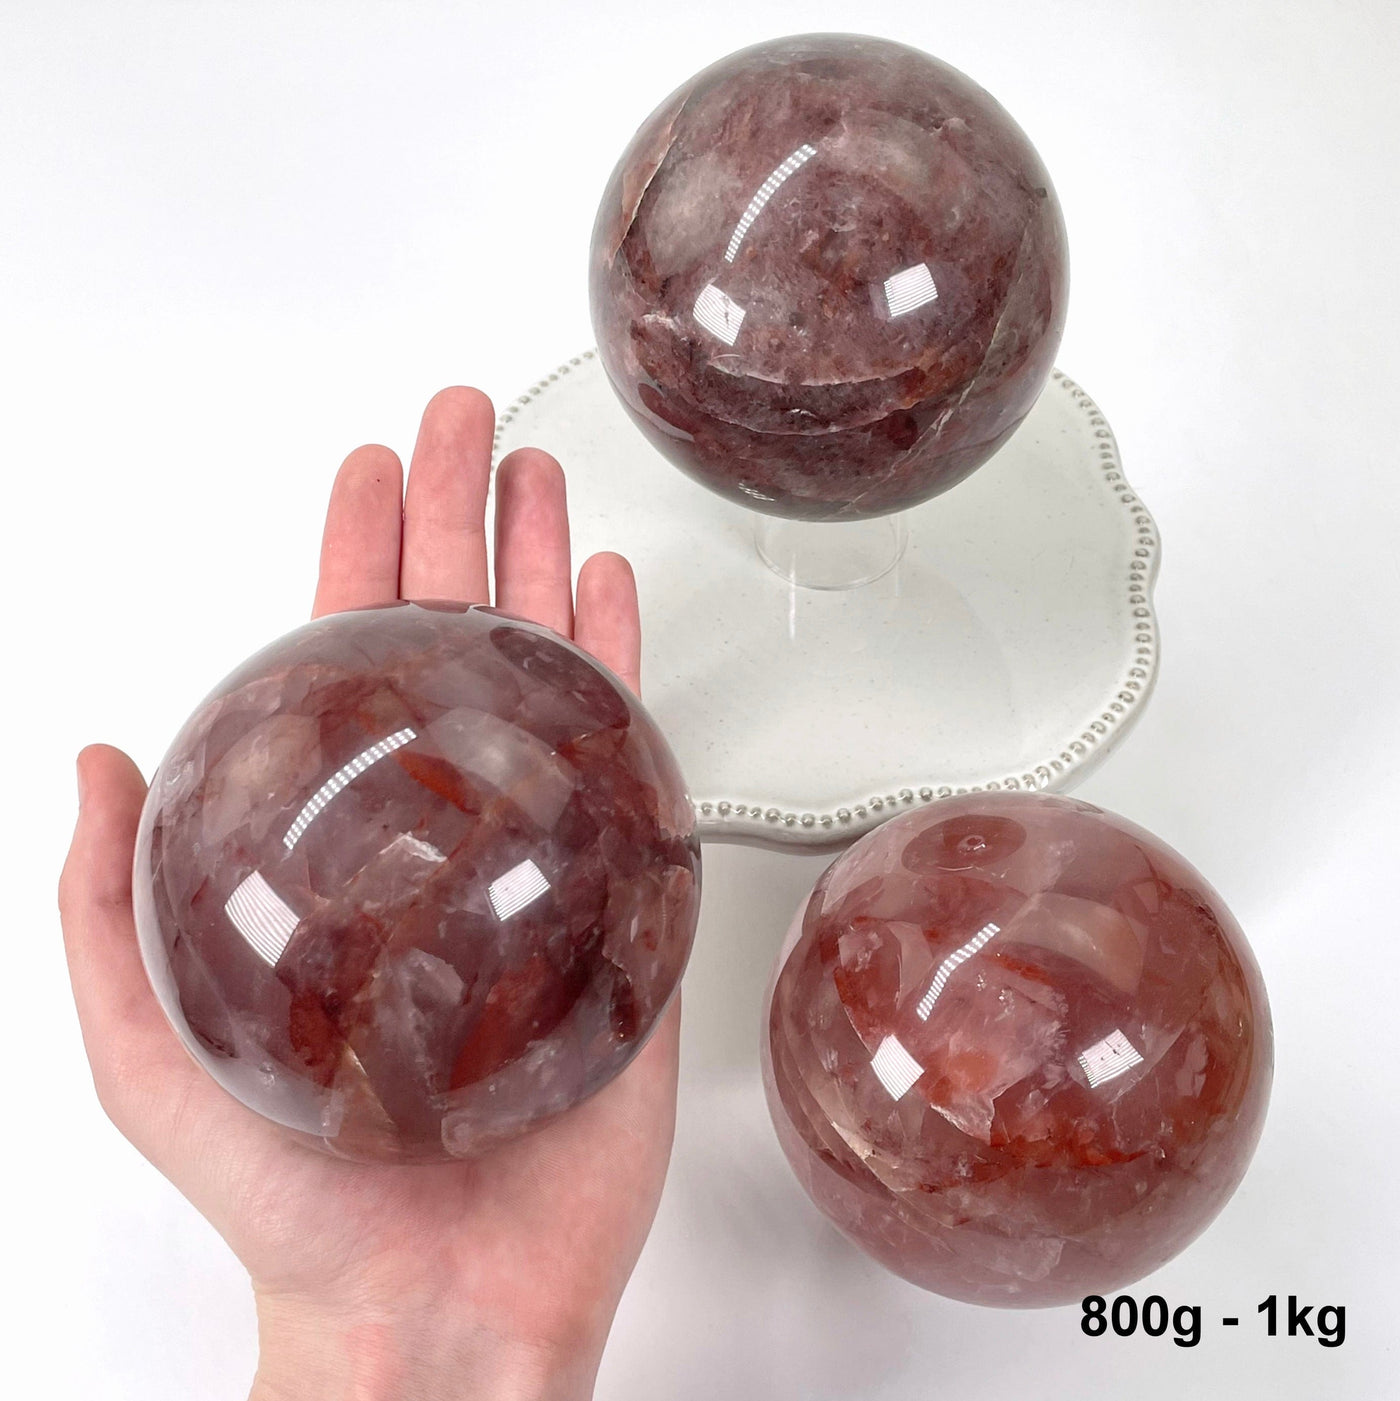 one 800g - 1kg guava polished sphere in hand with two others on display for possible variations